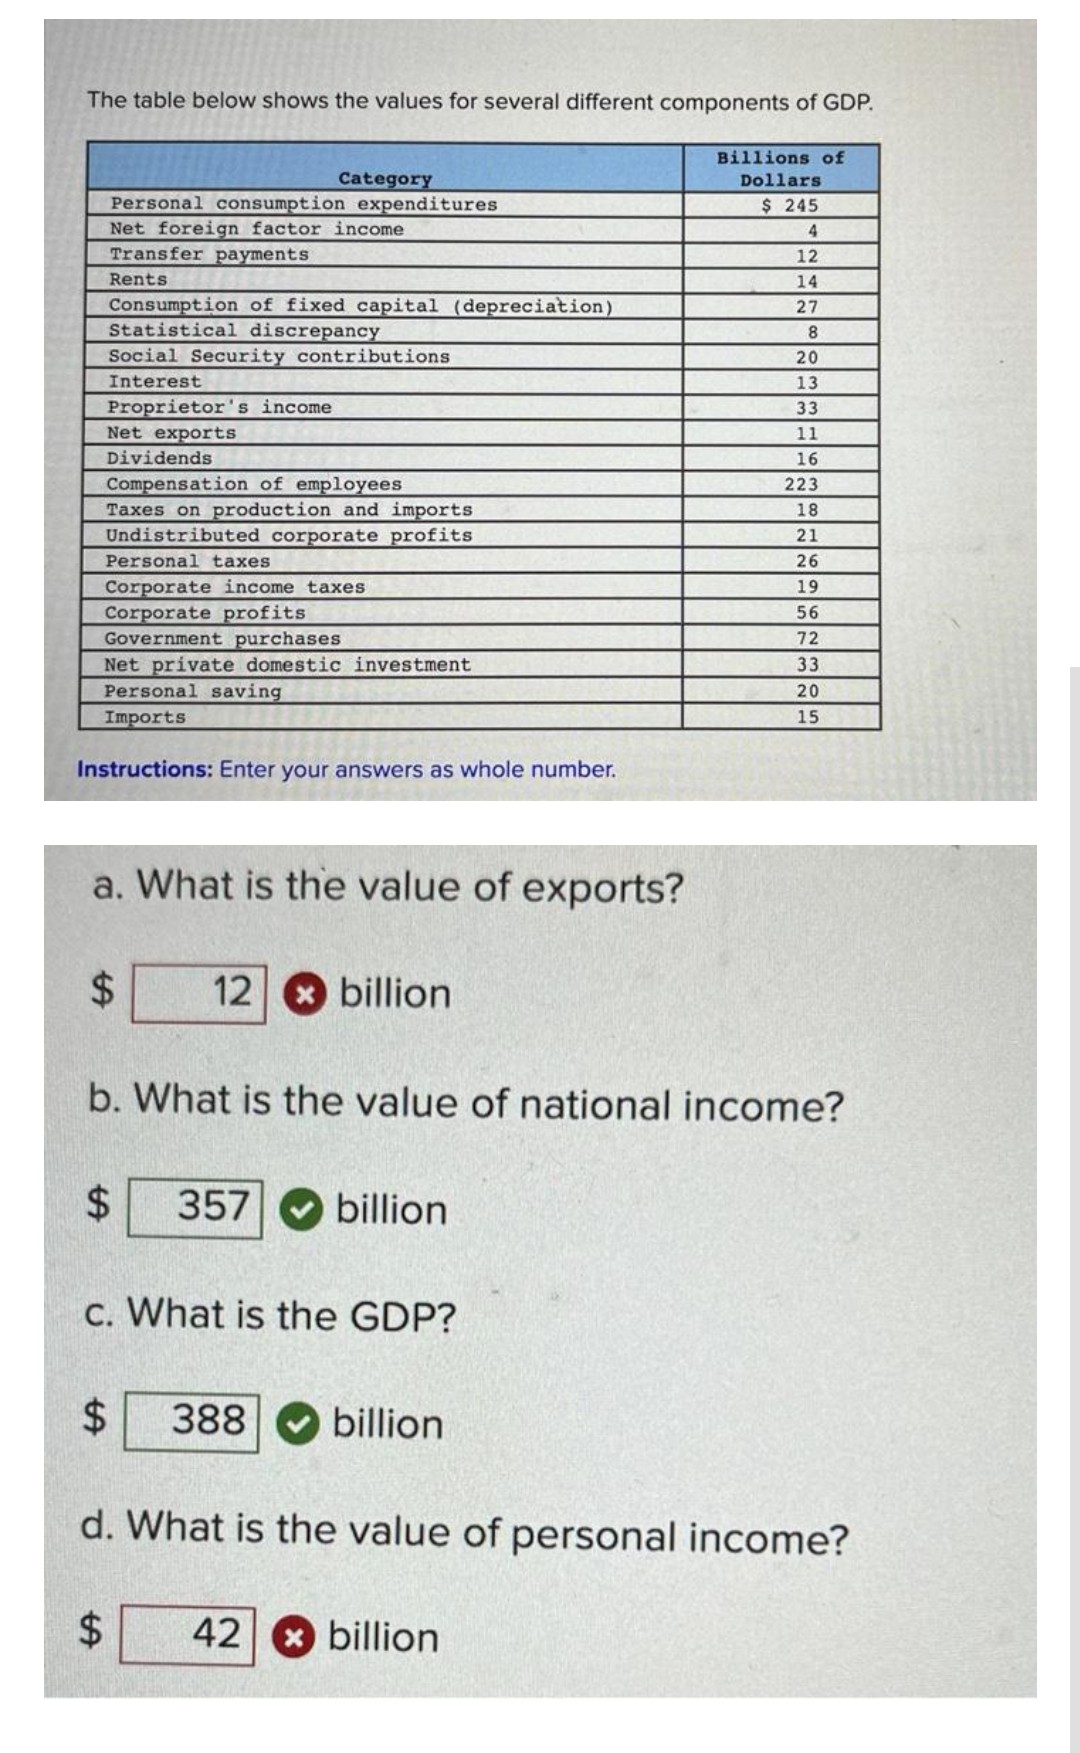 The table below shows the values for several different components of GDP.
Billions of
Dollars
$ 245
4
12
14
27
8
Category
Personal consumption expenditures
Net foreign factor income
Transfer payments
Rents
Consumption of fixed capital (depreciation)
Statistical discrepancy
Social Security contributions
Interest
Proprietor's income.
Net exports
Dividends
Compensation of employees
Taxes on production and imports
Undistributed corporate profits
Personal taxes
Corporate income taxes
Corporate profits
Government purchases
Net private domestic investment
Personal saving
Imports
Instructions: Enter your answers as whole number.
a. What is the value of exports?
$ 12 billion
SA
b. What is the value of national income?
tA
$
$
357
c. What is the GDP?
billion
$ 388 billion
d. What is the value of personal income?
20
13
33
11
16
223
18
21
26
19
56
72
33
20
15
42 billion